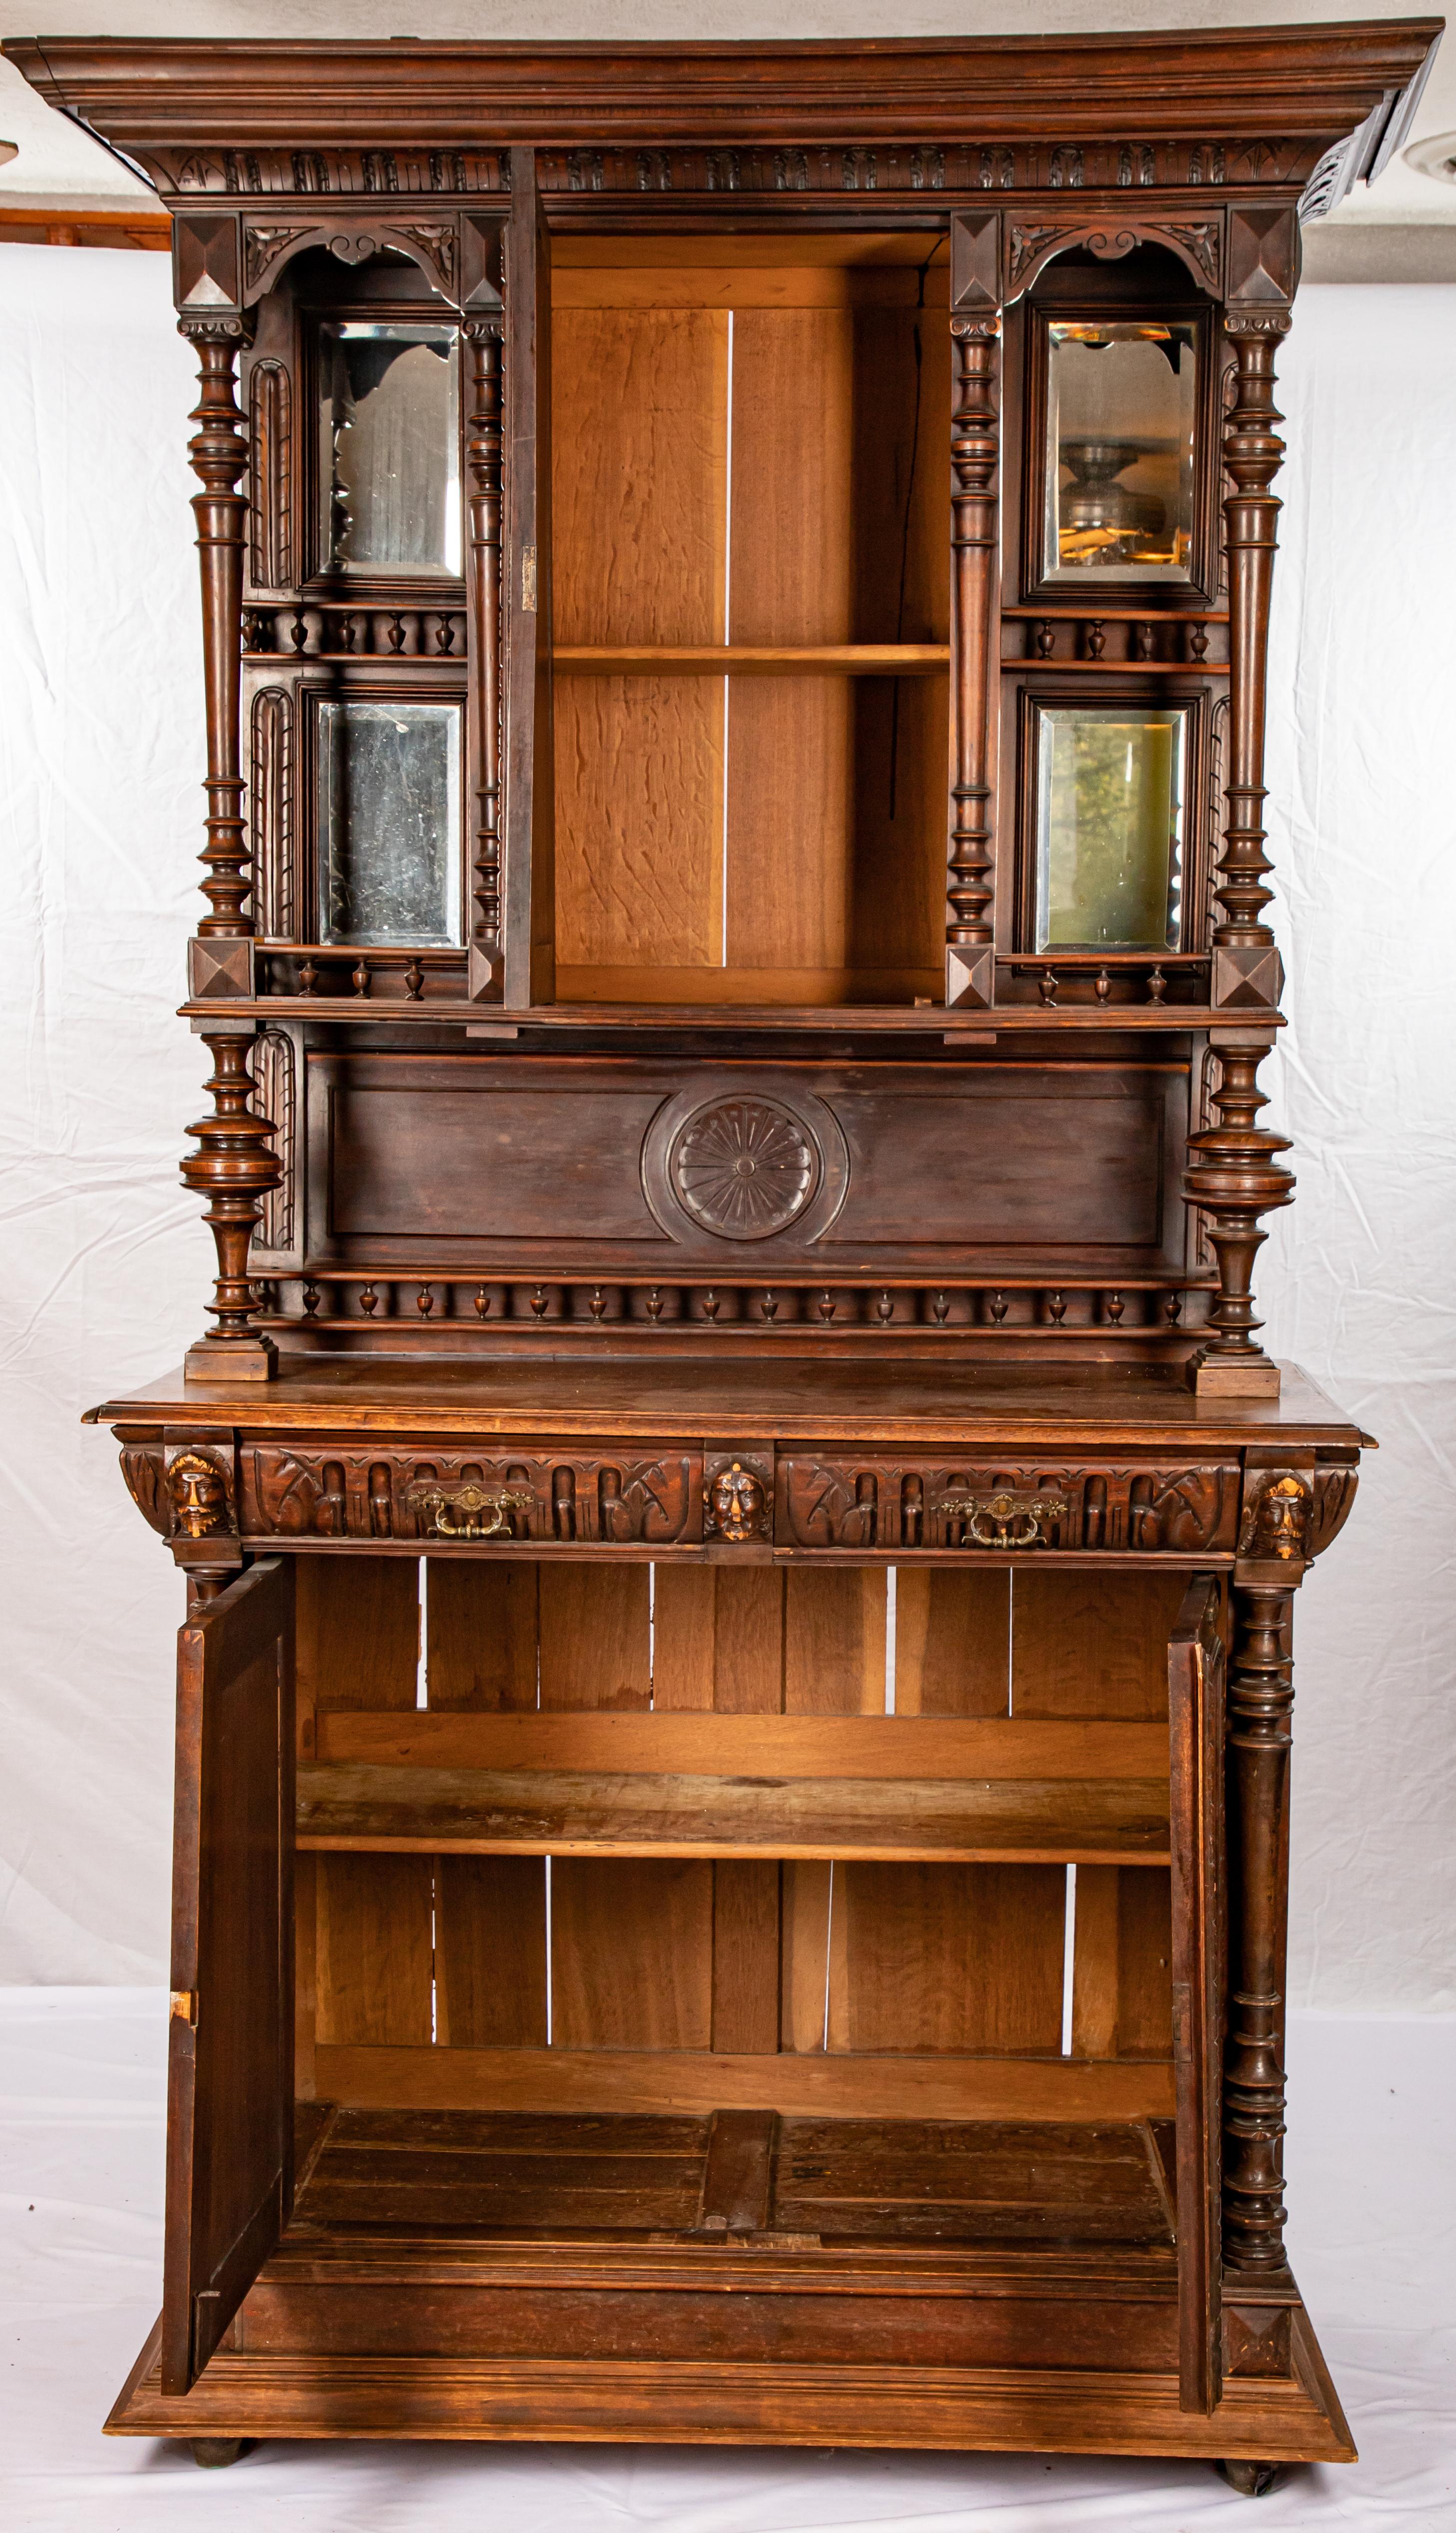 Carved Walnut Belgium Server, Mid-19th Century For Sale 3